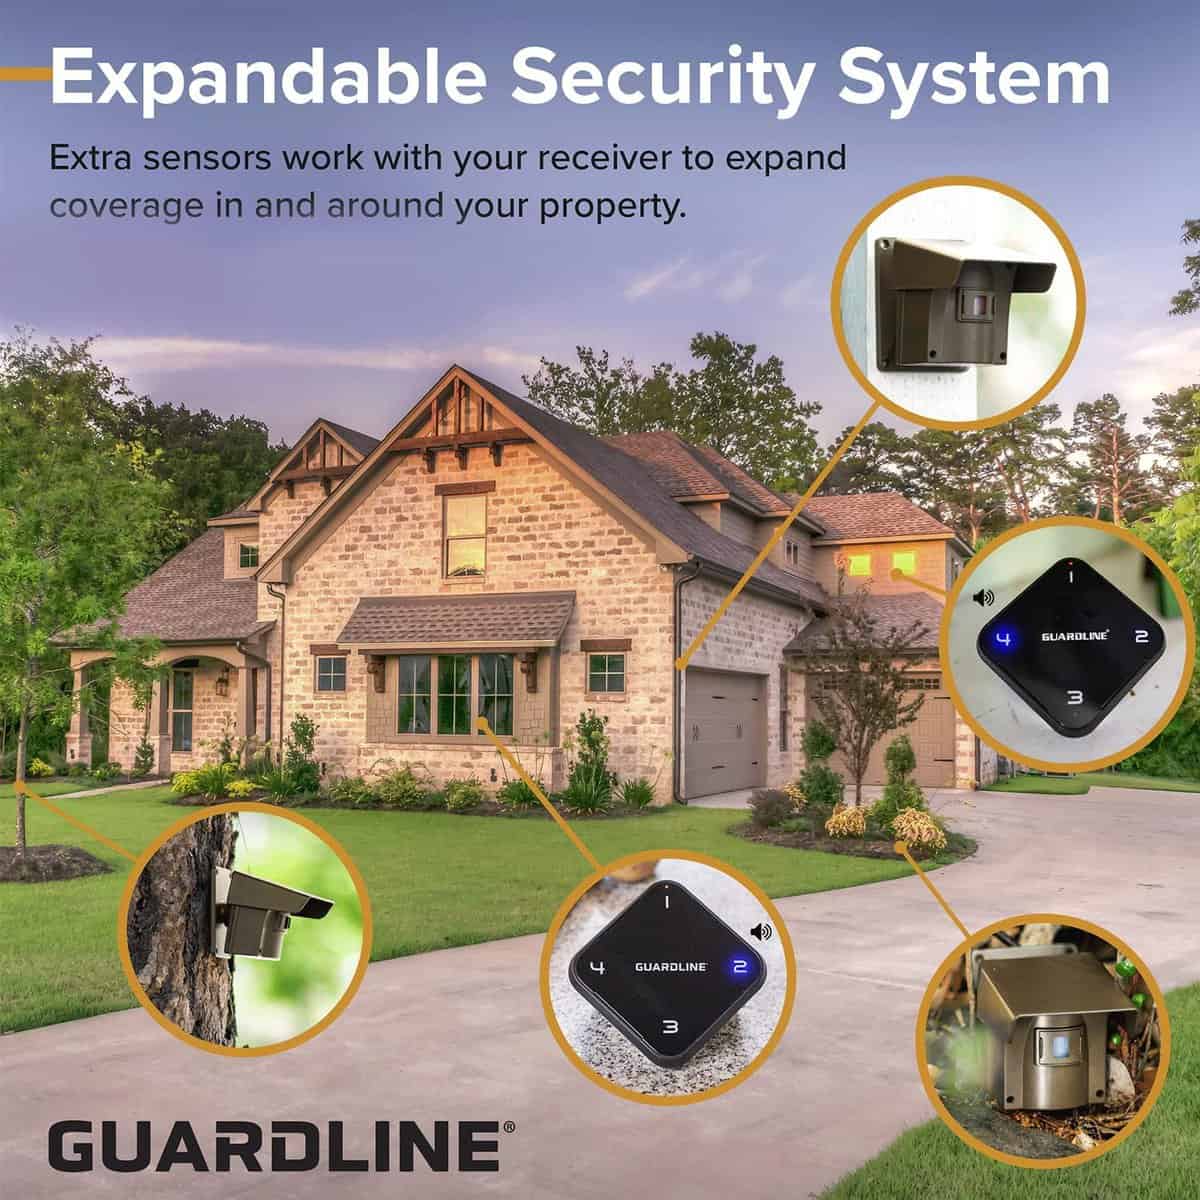 Enhancing Home Security with Driveway Alarms